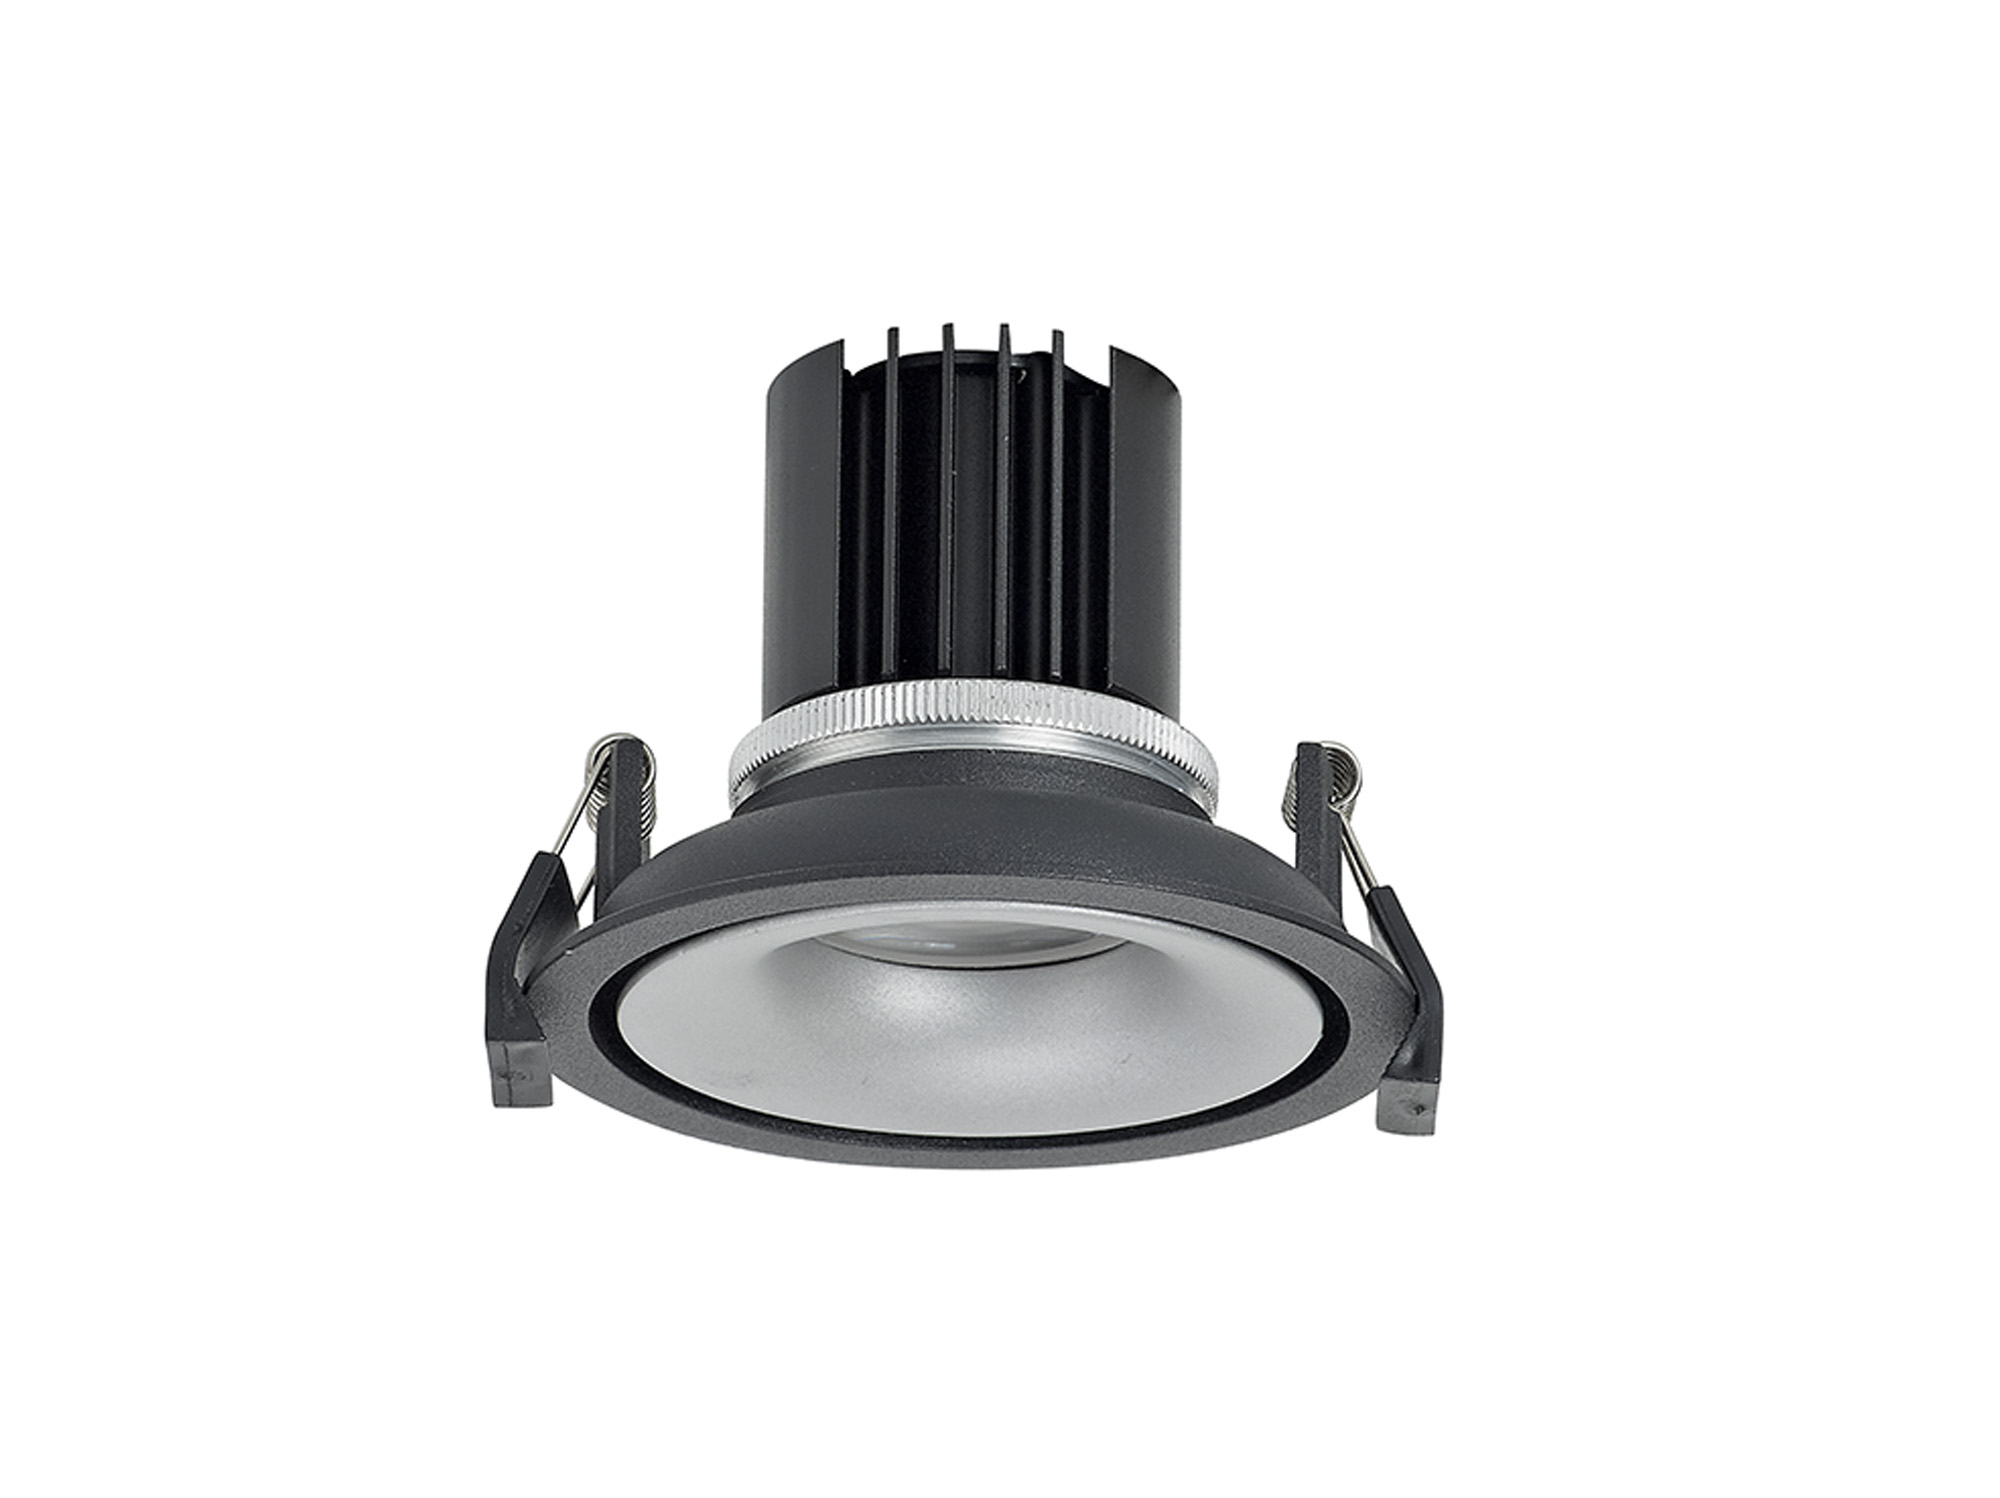 DM202060  Bolor 9 Tridonic Powered 9W 2700K 770lm 24° CRI>90 LED Engine Black/Silver Fixed Recessed Spotlight; IP20